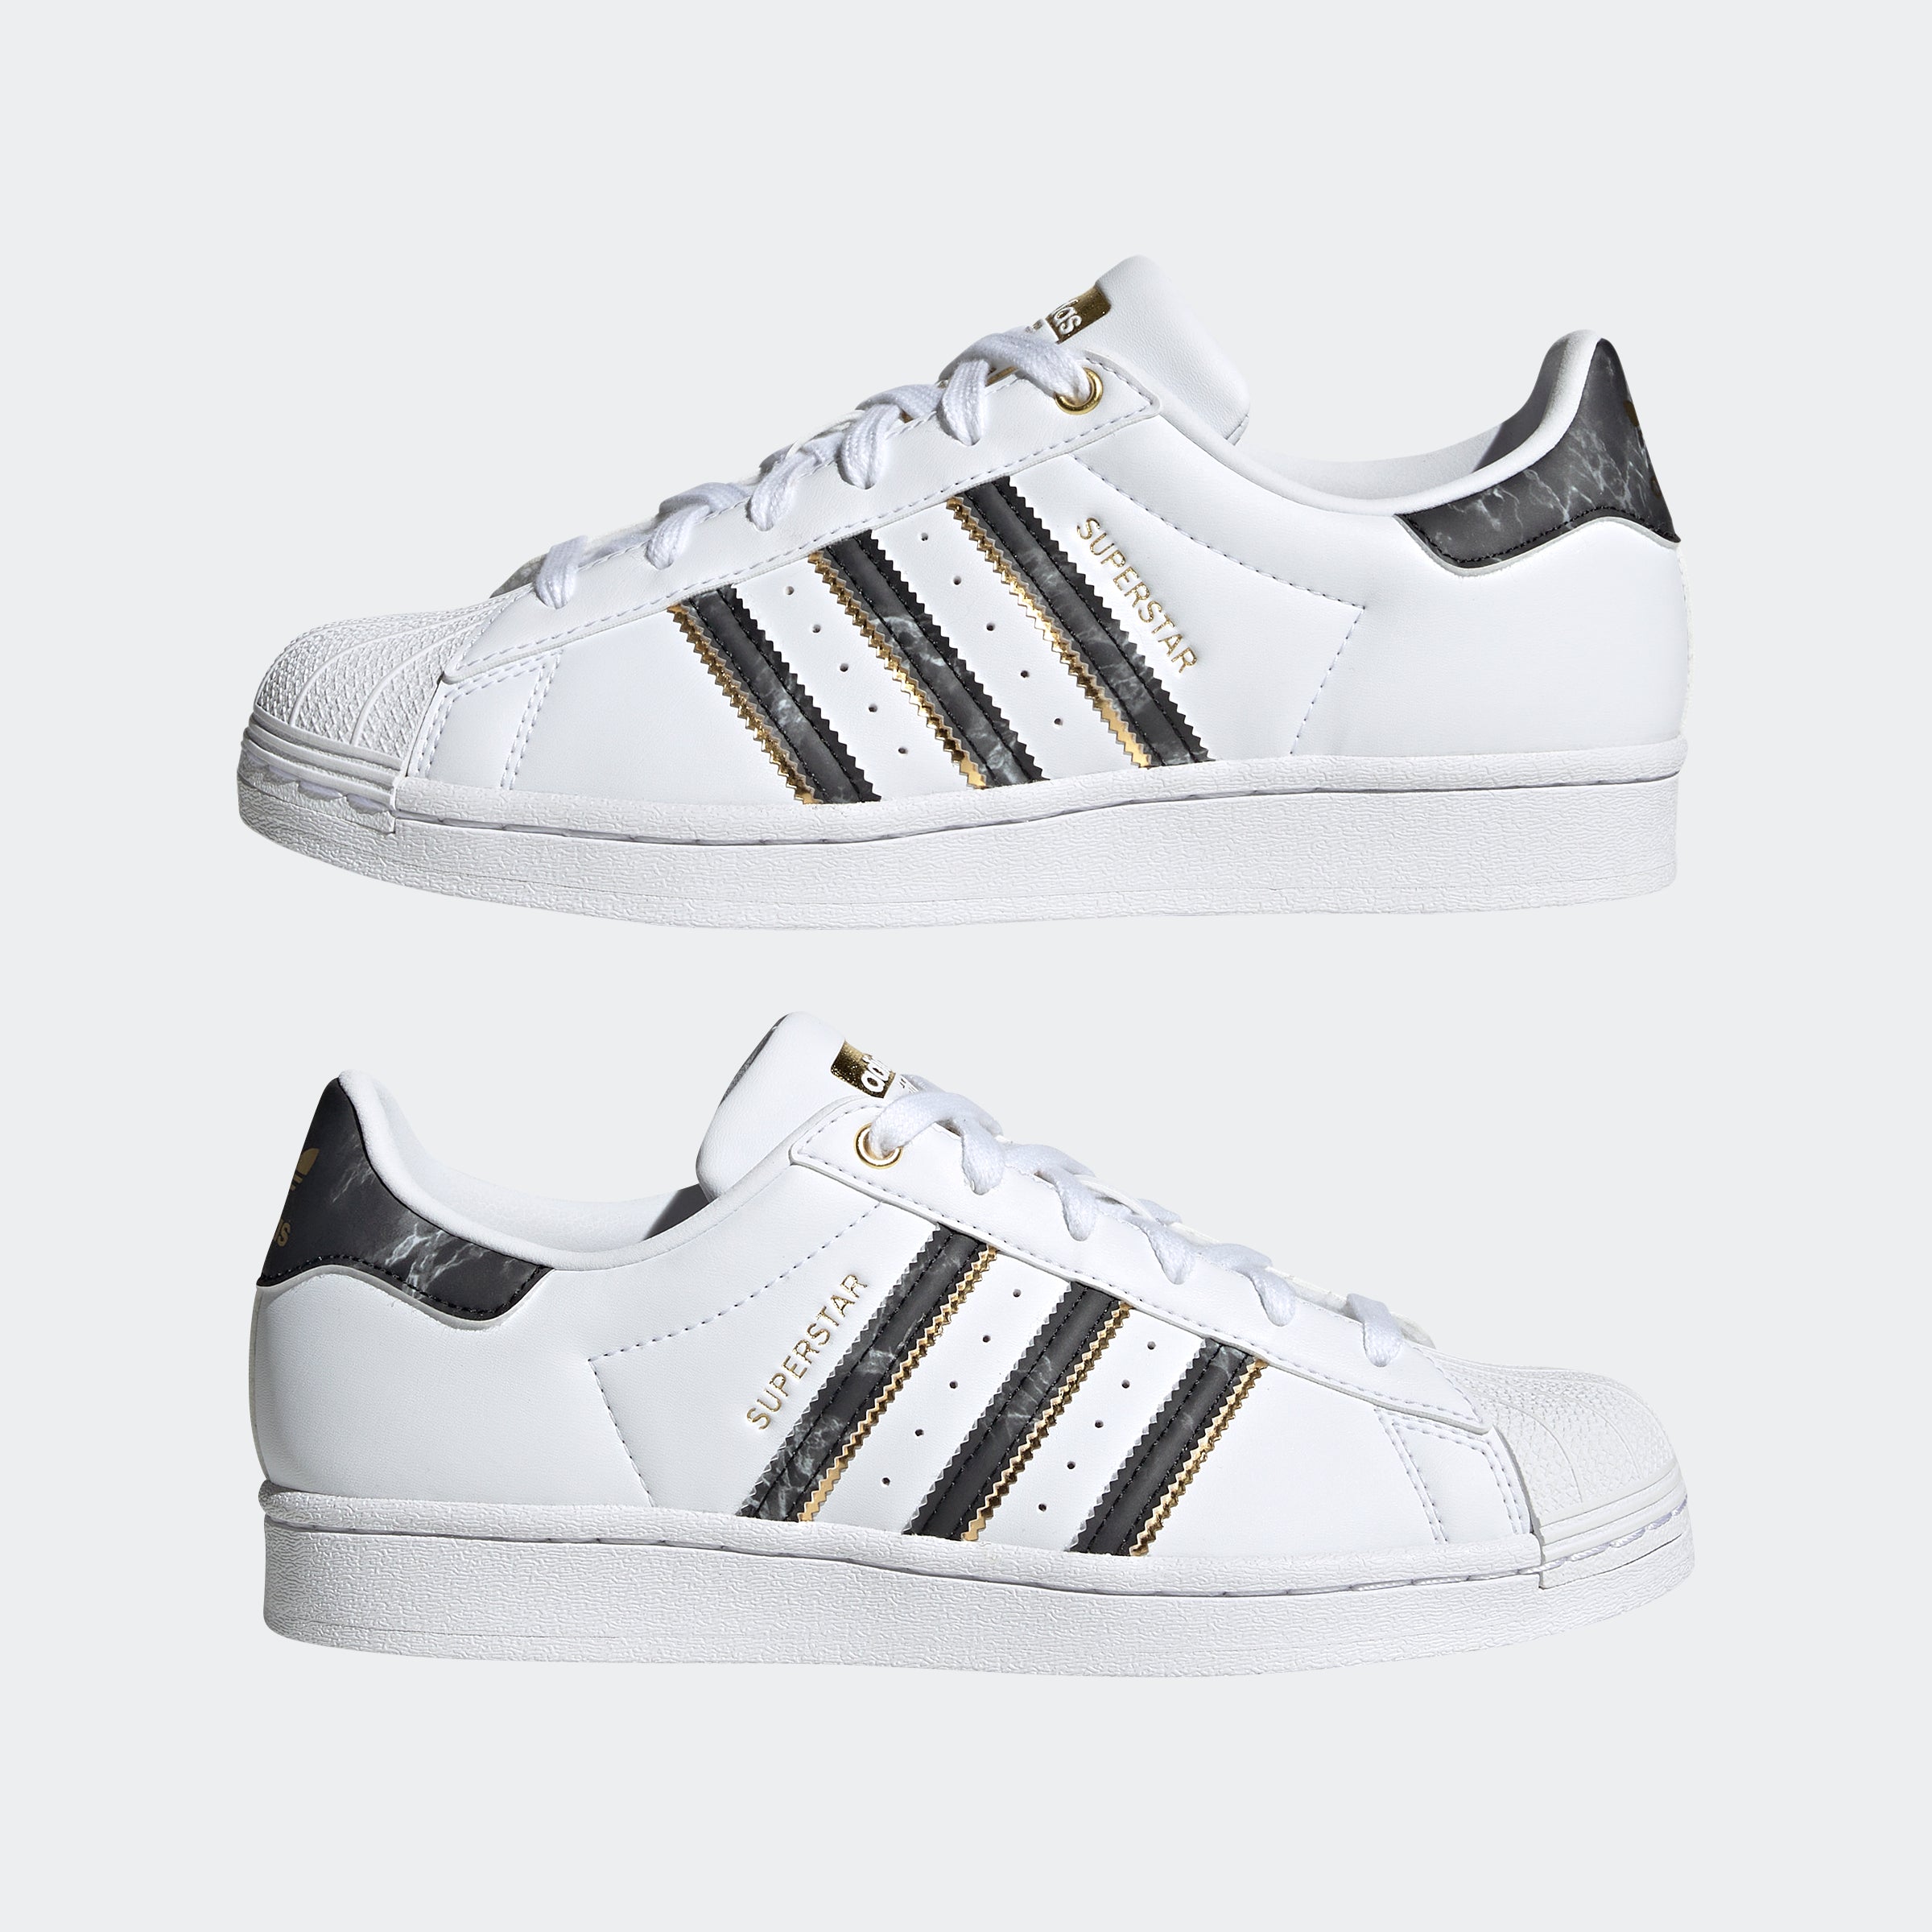 Adidas Originals Superstar Sneakers Womens 6 White Leather Signature Shell  Toe